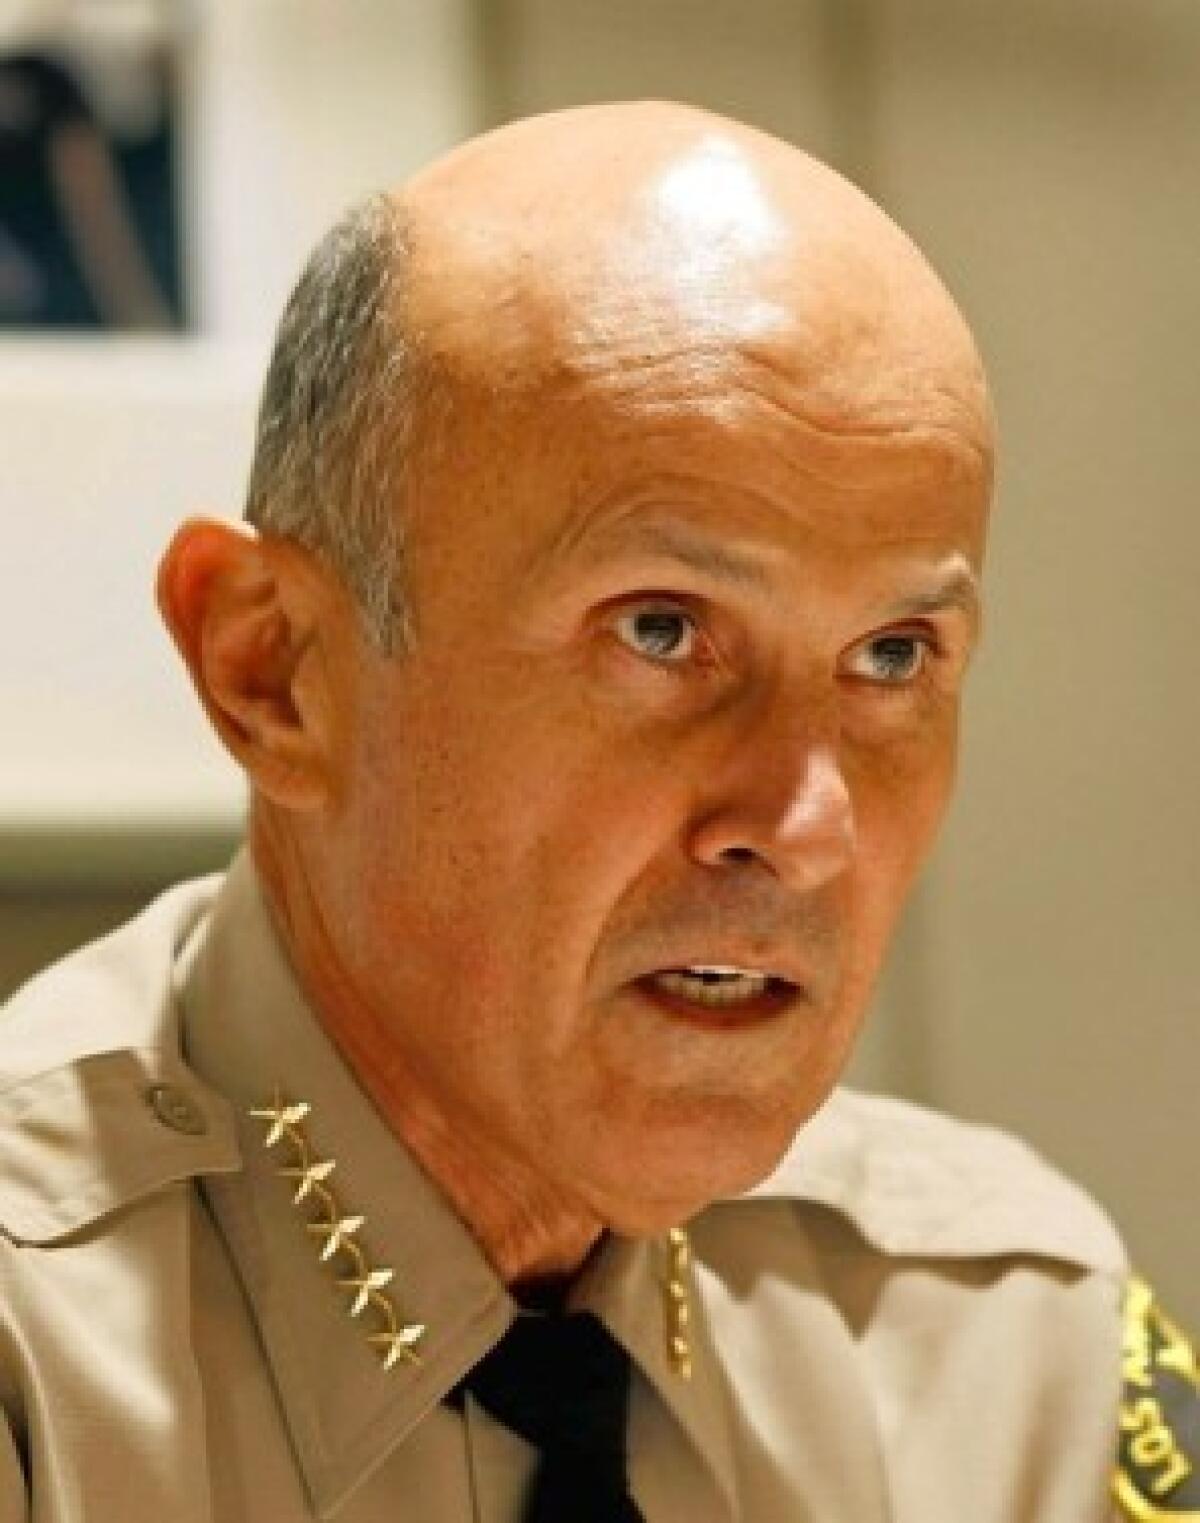 Sheriff Lee Baca said he was "flabbergasted" by the scope of the federal request for documents.